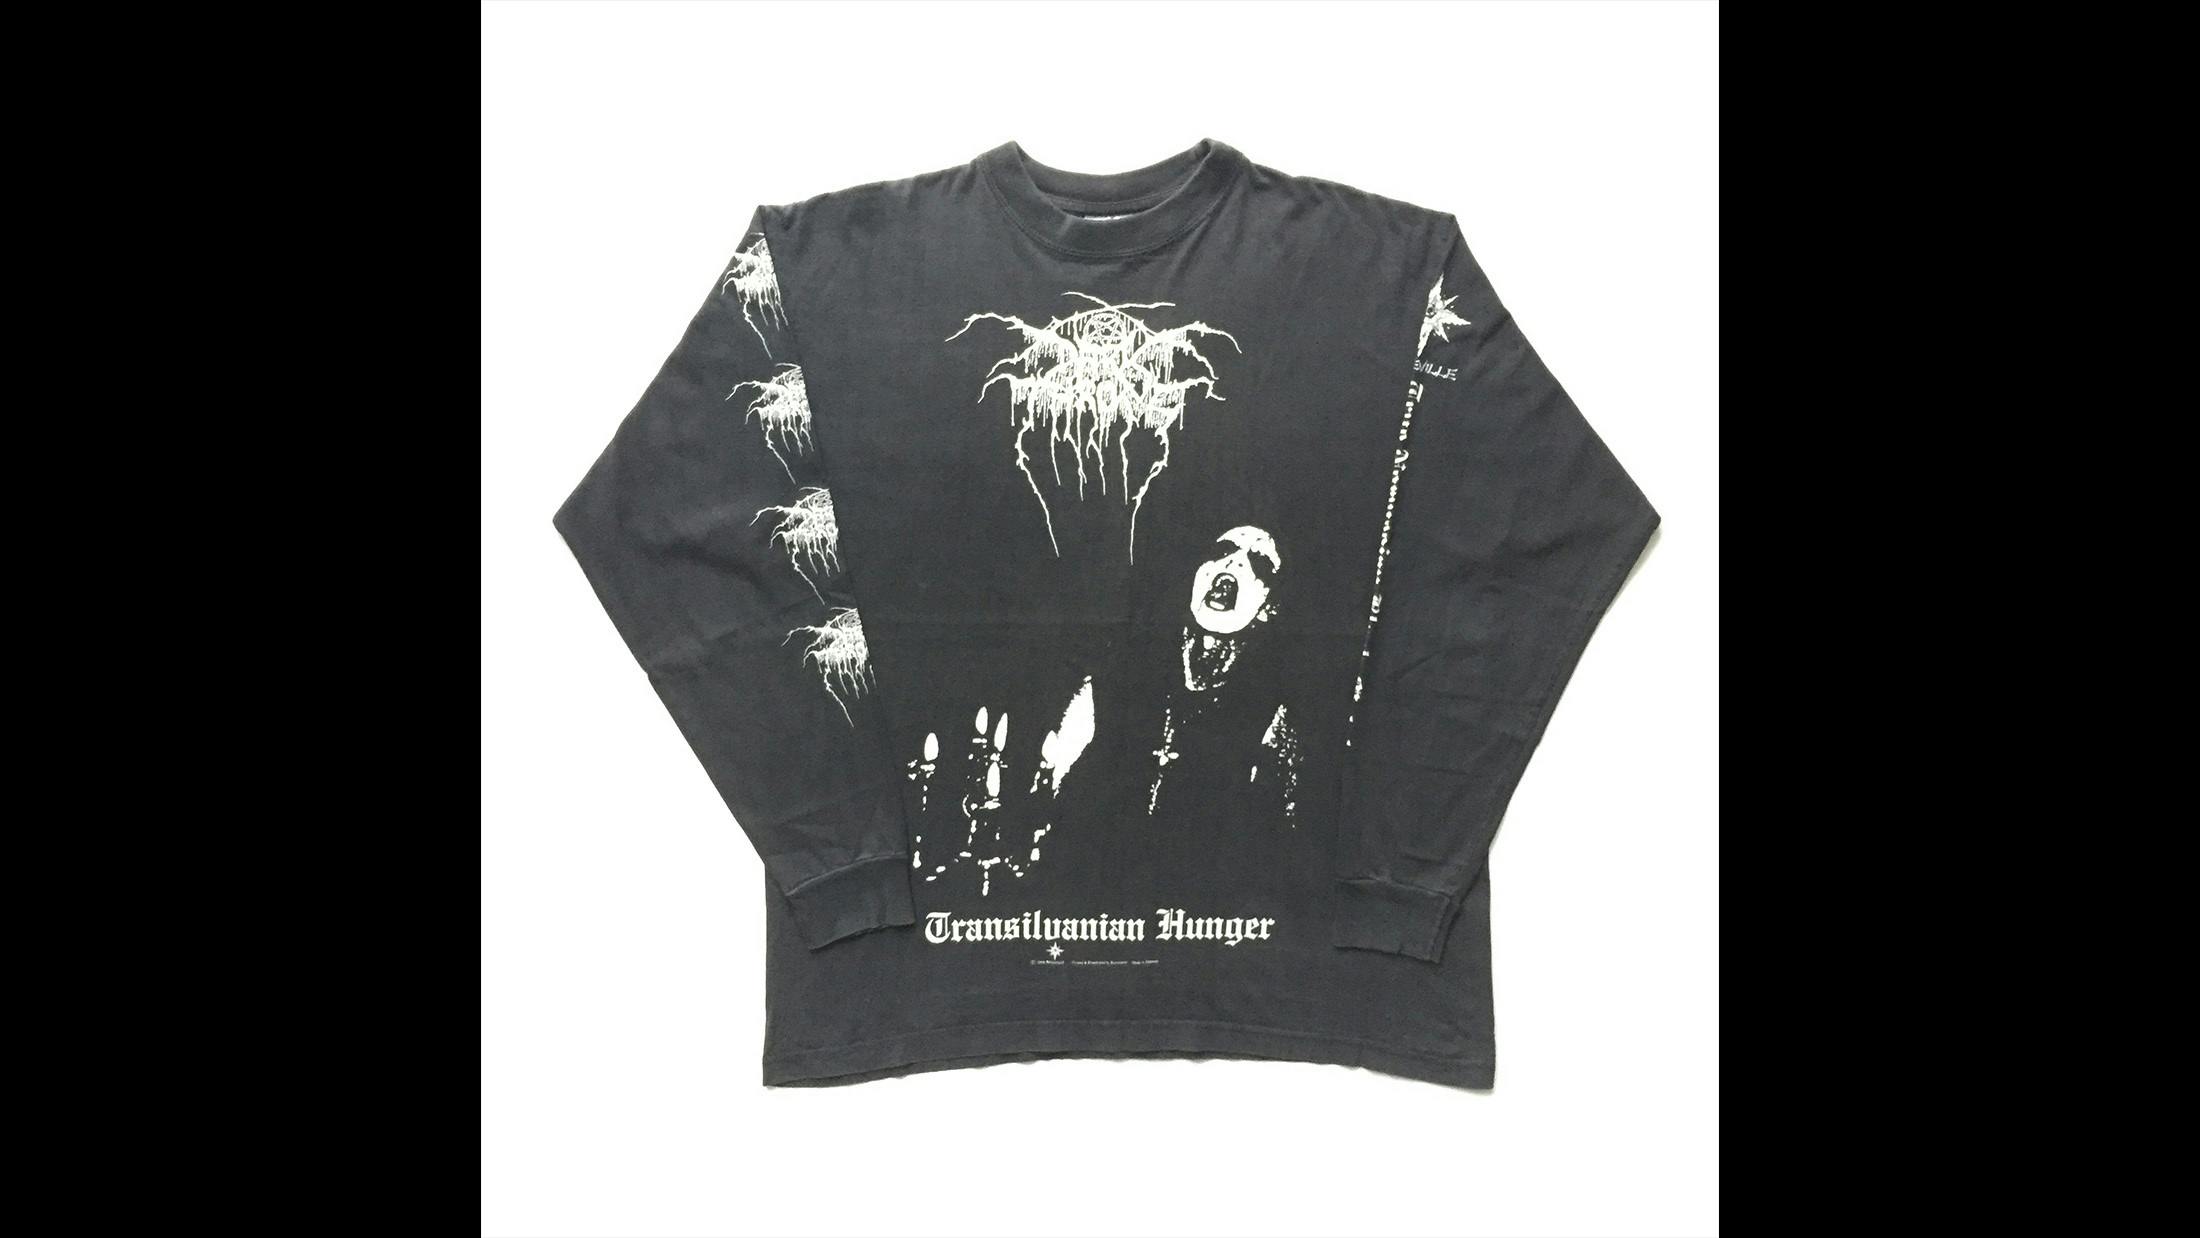 '98 Peaceville Records long sleeve with the iconic artwork from ‘Transilvanian Hunger’.